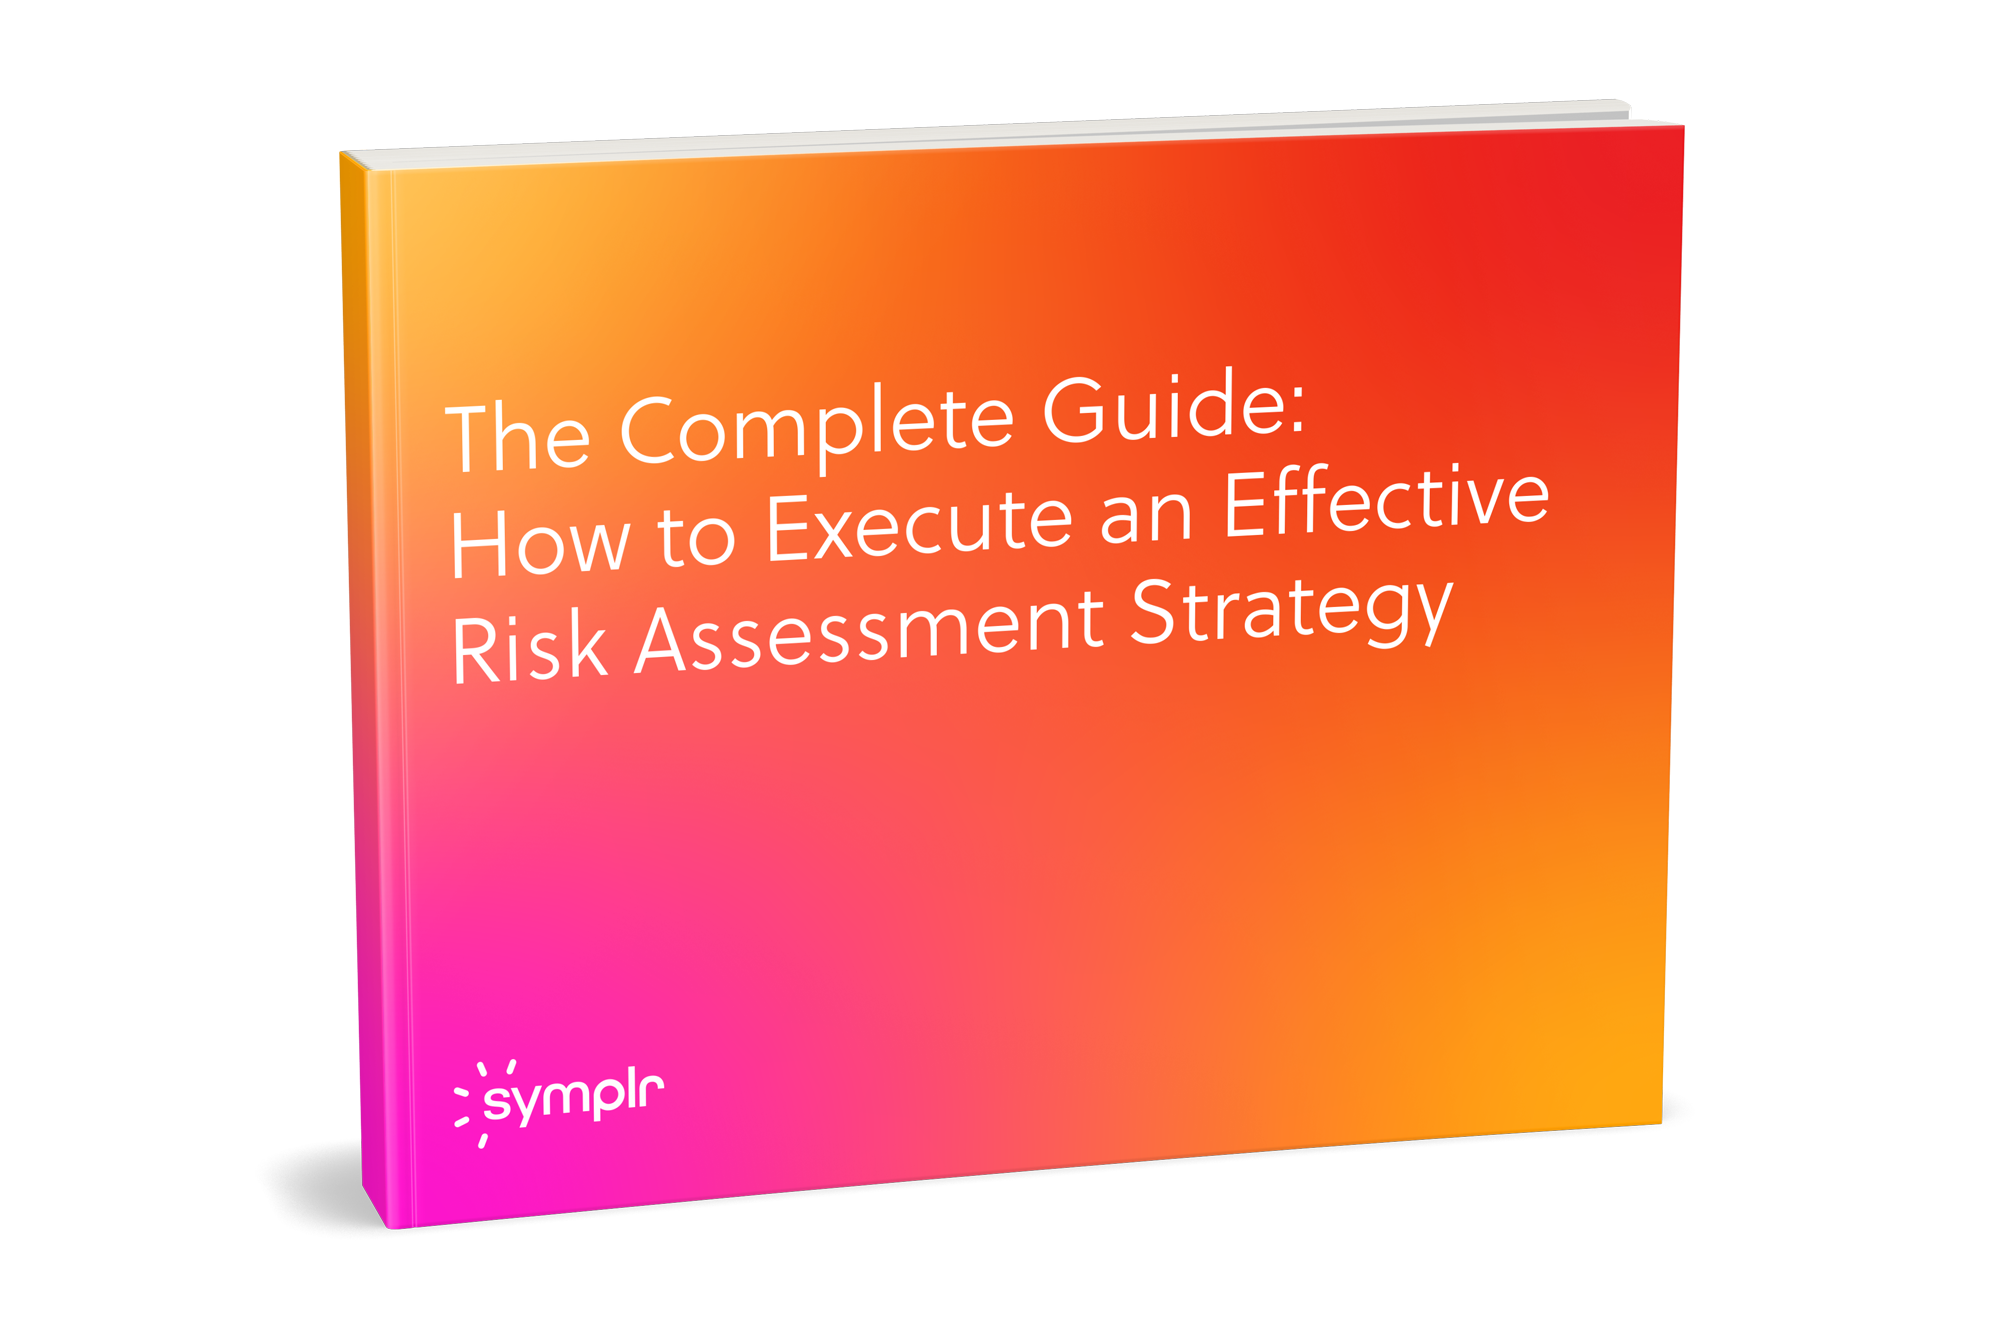 The_Complete_Guide_How_to_Execute_an_Effective_Risk_Assessment_Strategy_staged